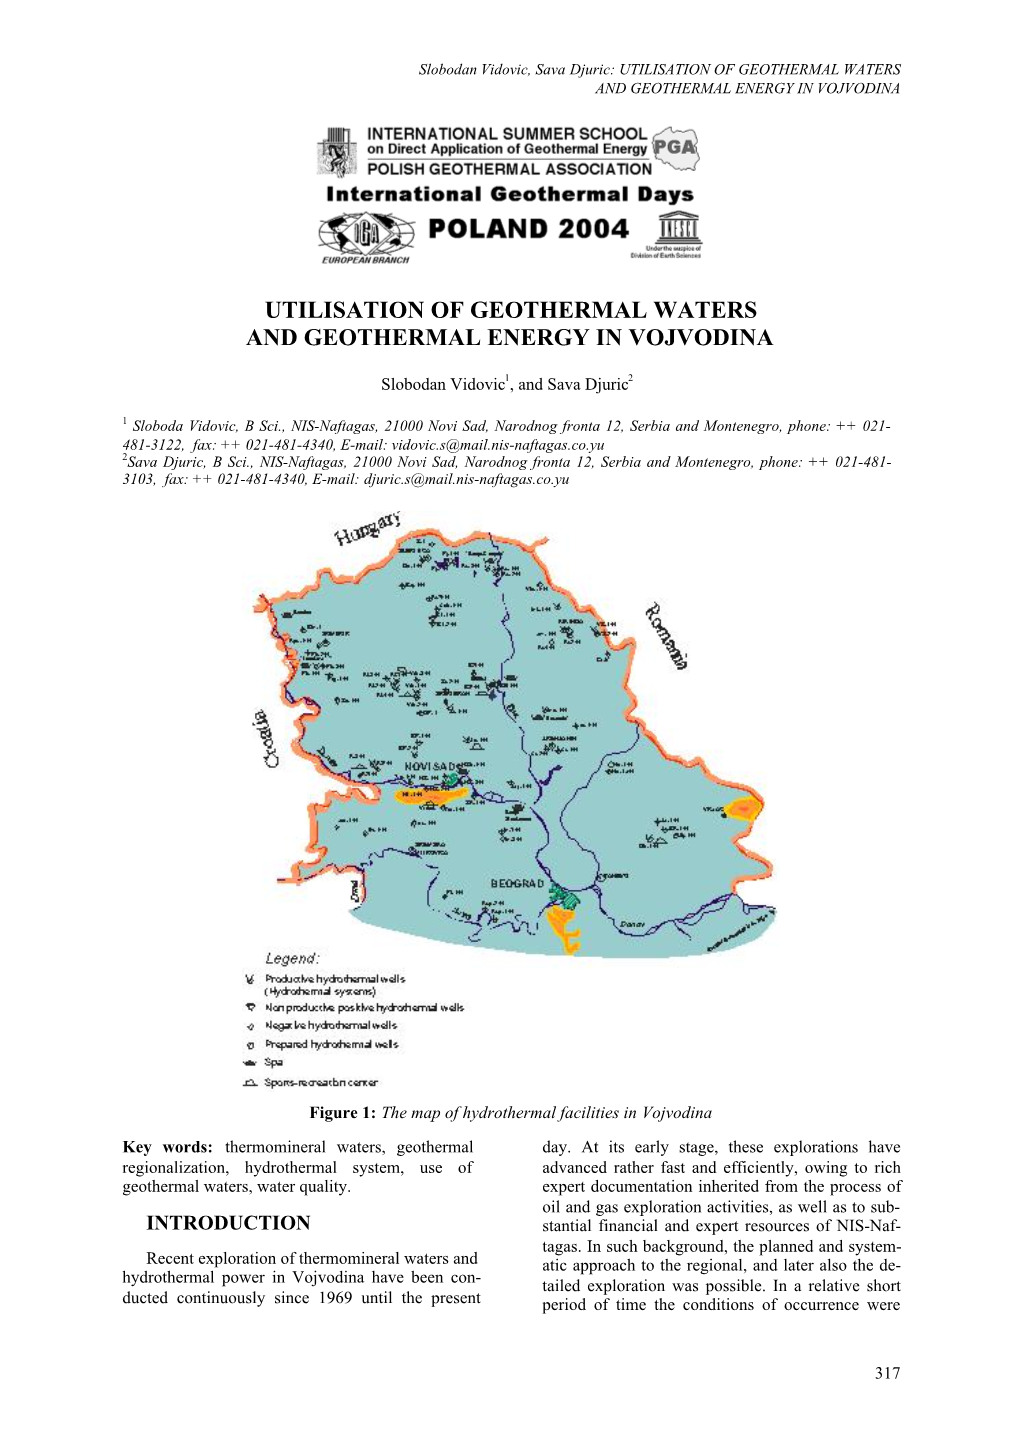 Utilisation of Geothermal Waters and Geothermal Energy in Vojvodina